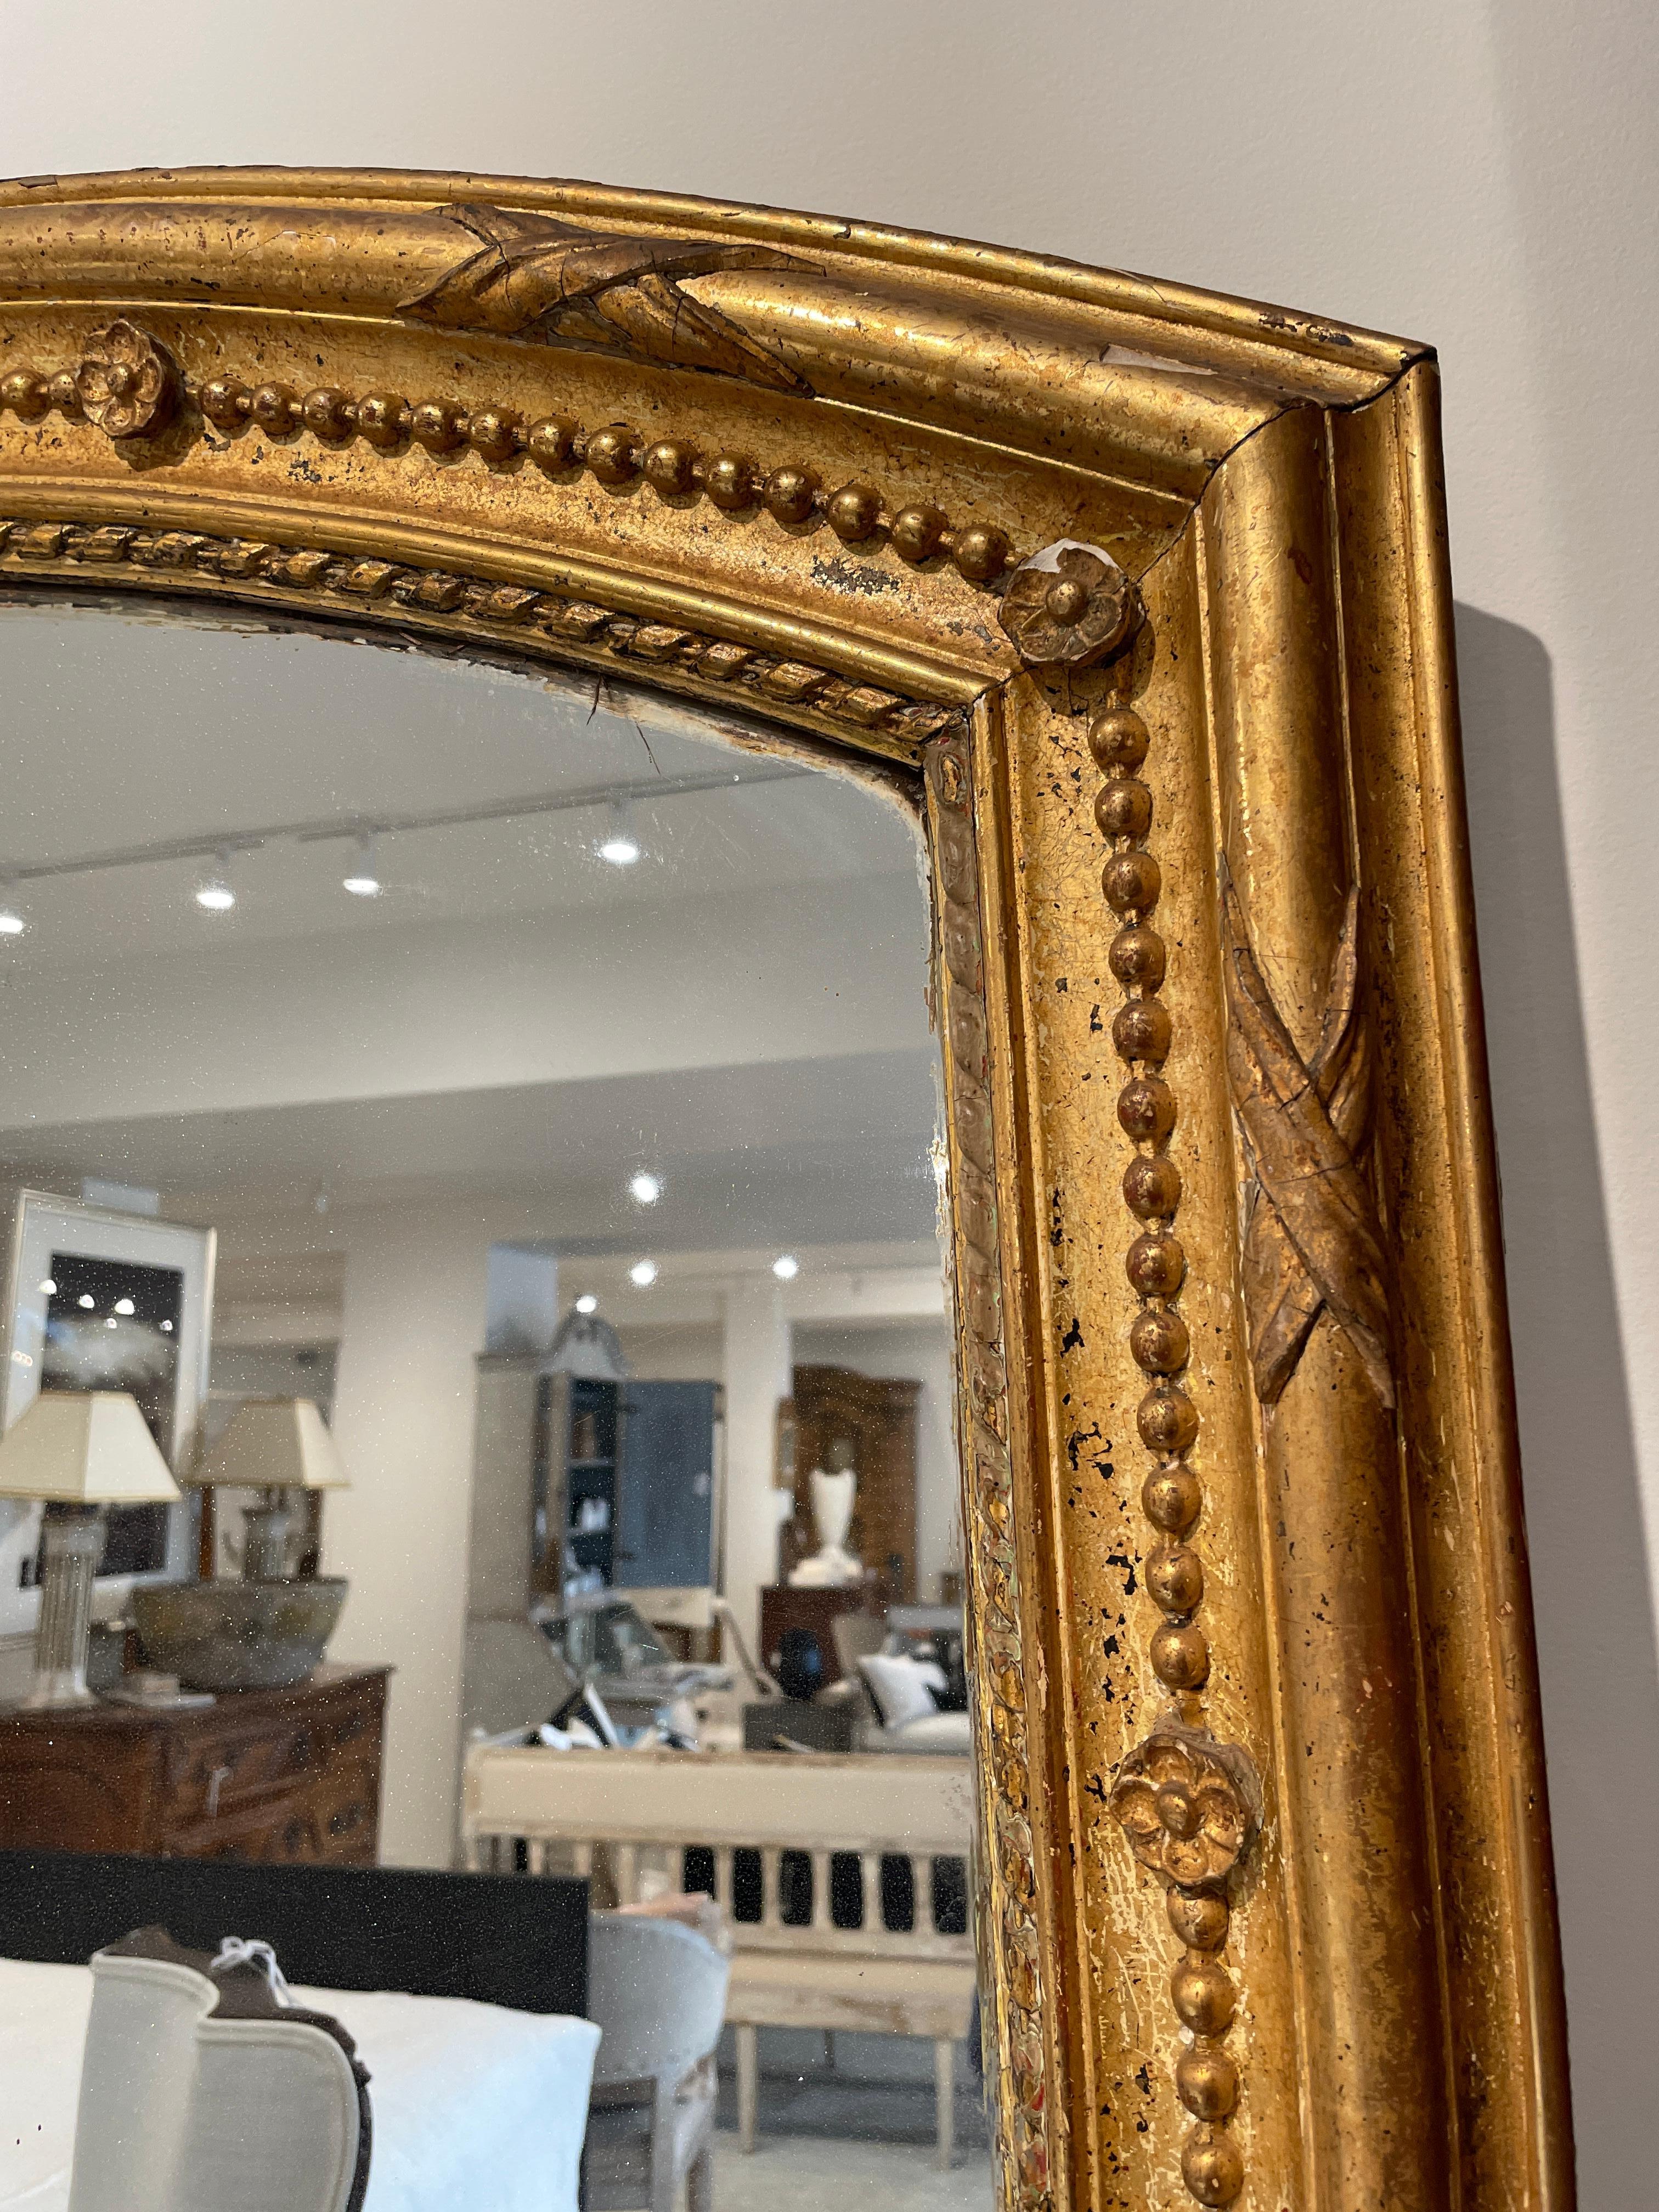 Grand scale and lovely gilding create a hero piece for any space! The arched top gives added interest reinforced by the intricate carving details surrounding the large mirror.
 